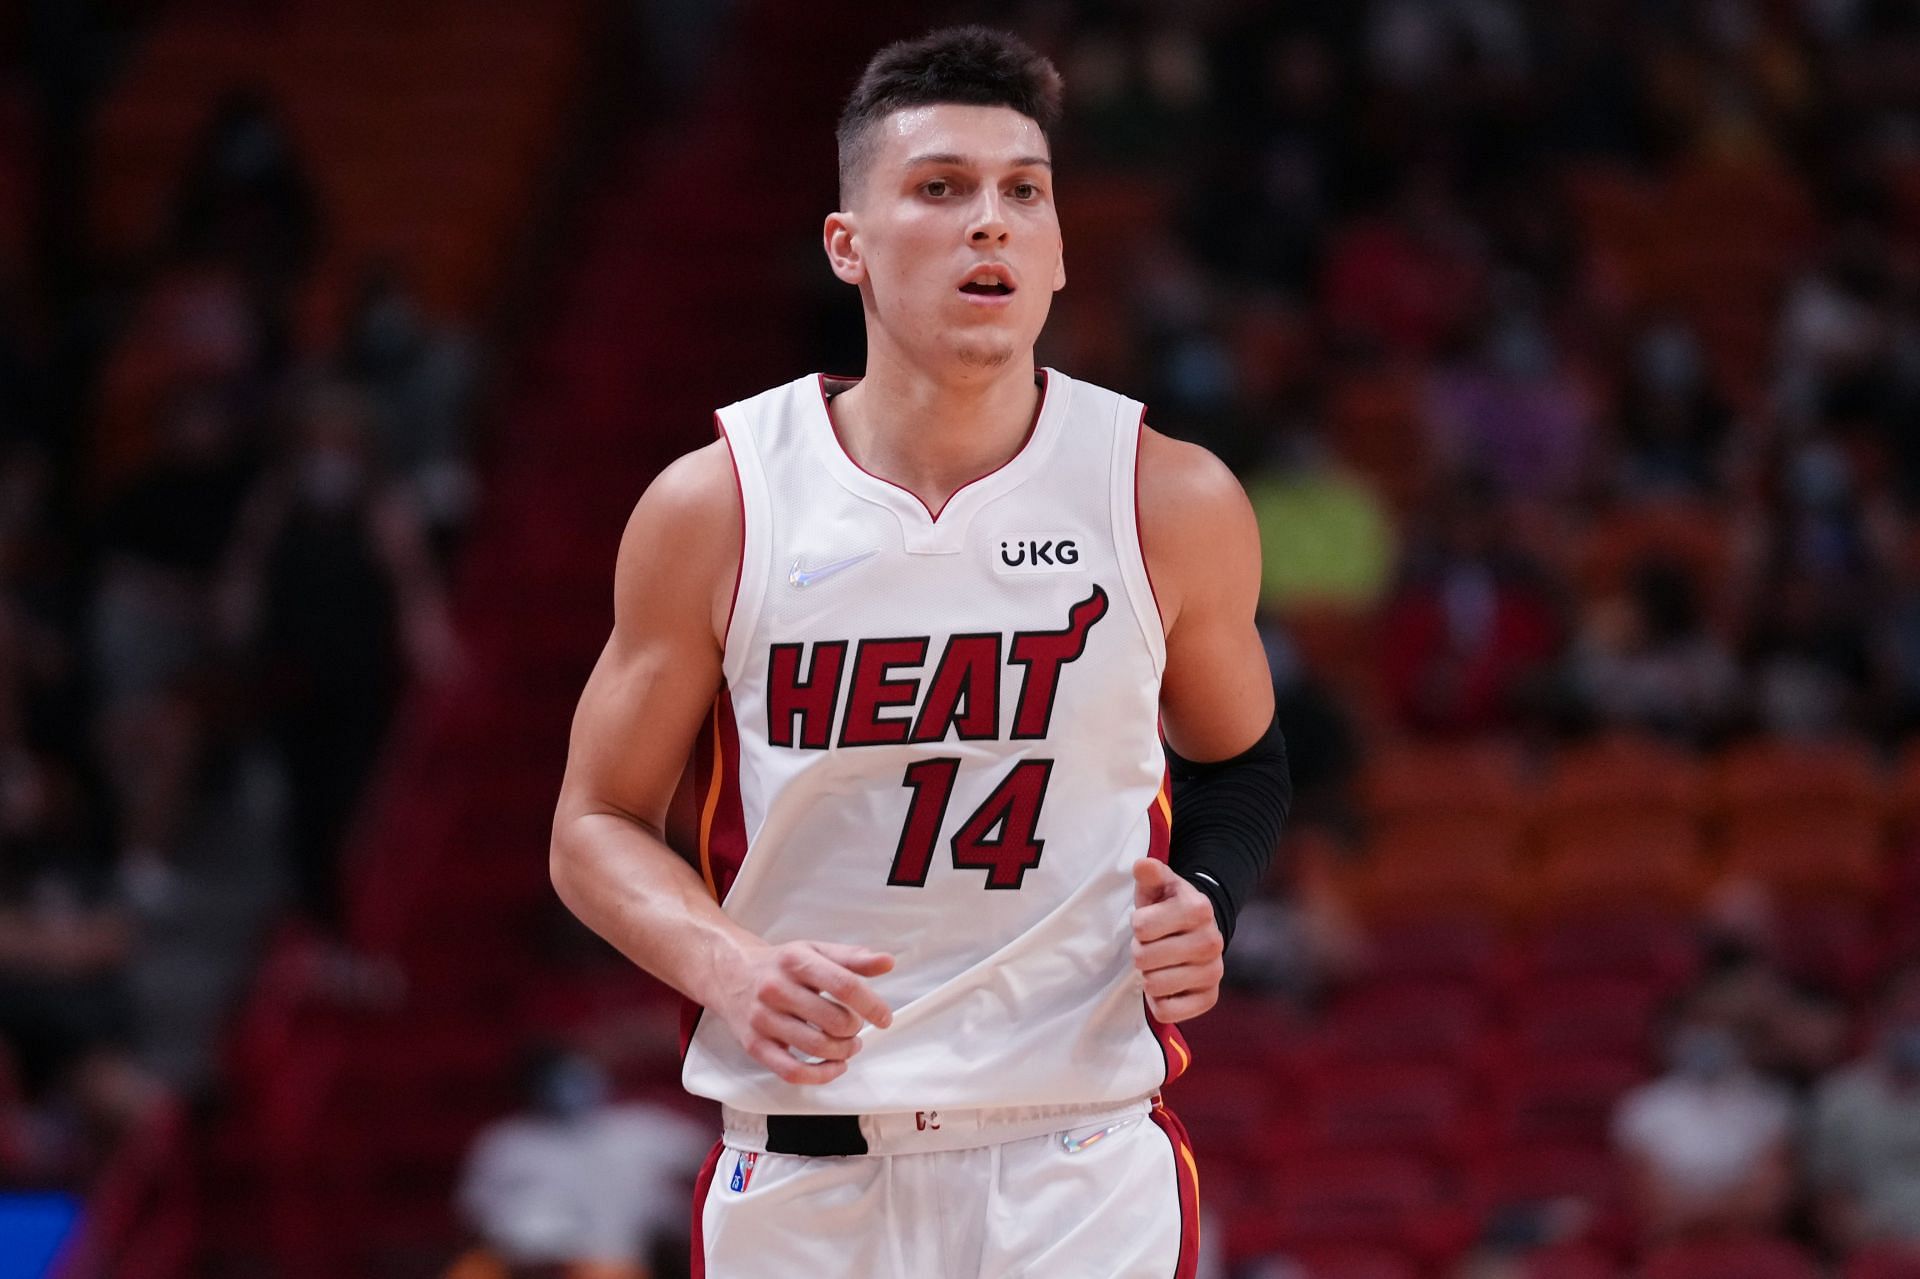 Tyler Herro #14 of the Miami Heat runs back to play defense against the Atlanta Hawks in the third quarter of preseason action at FTX Arena on October 04, 2021 in Miami, Florida.